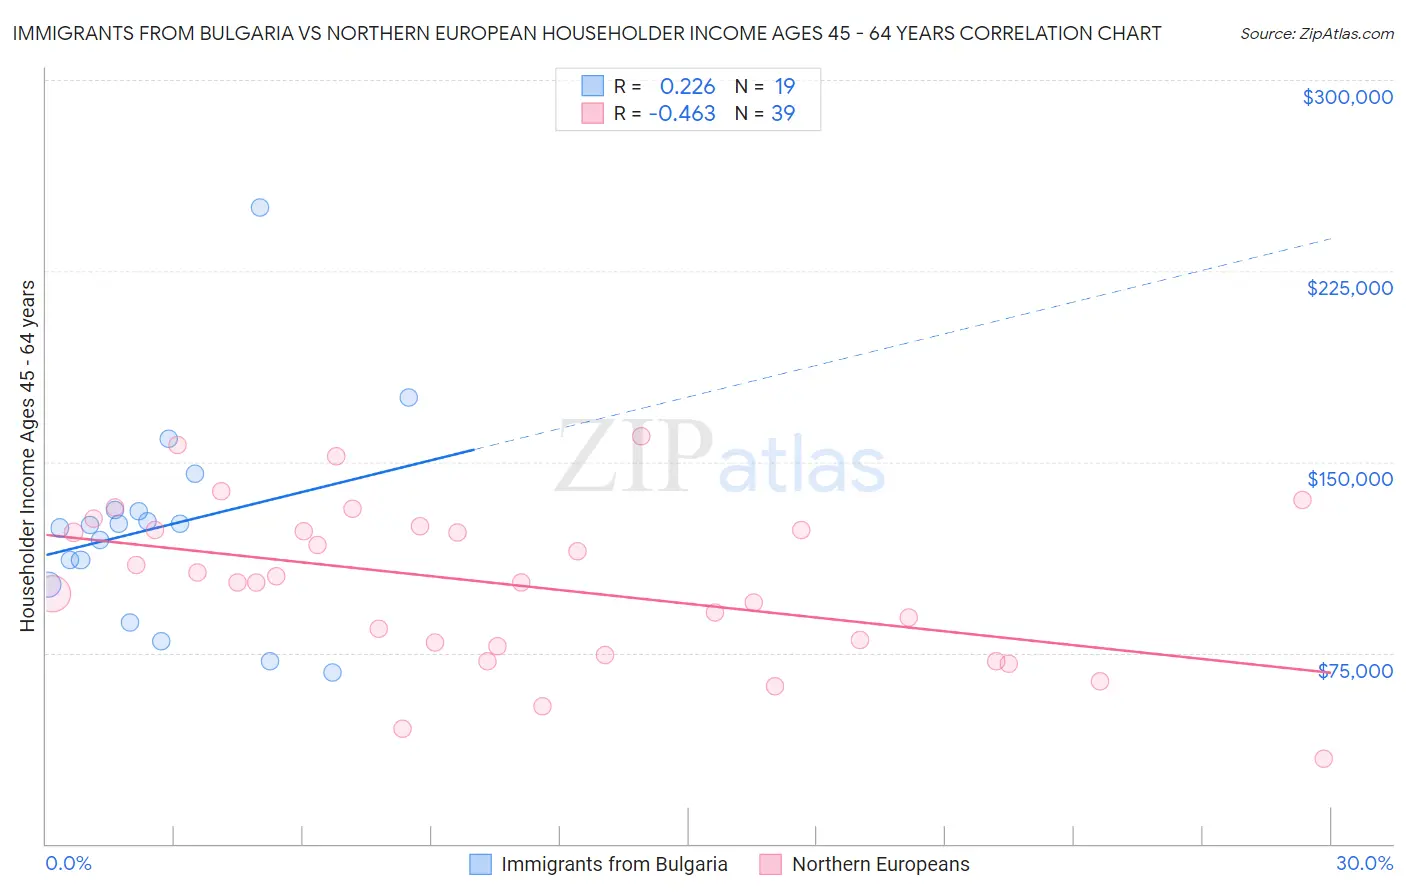 Immigrants from Bulgaria vs Northern European Householder Income Ages 45 - 64 years